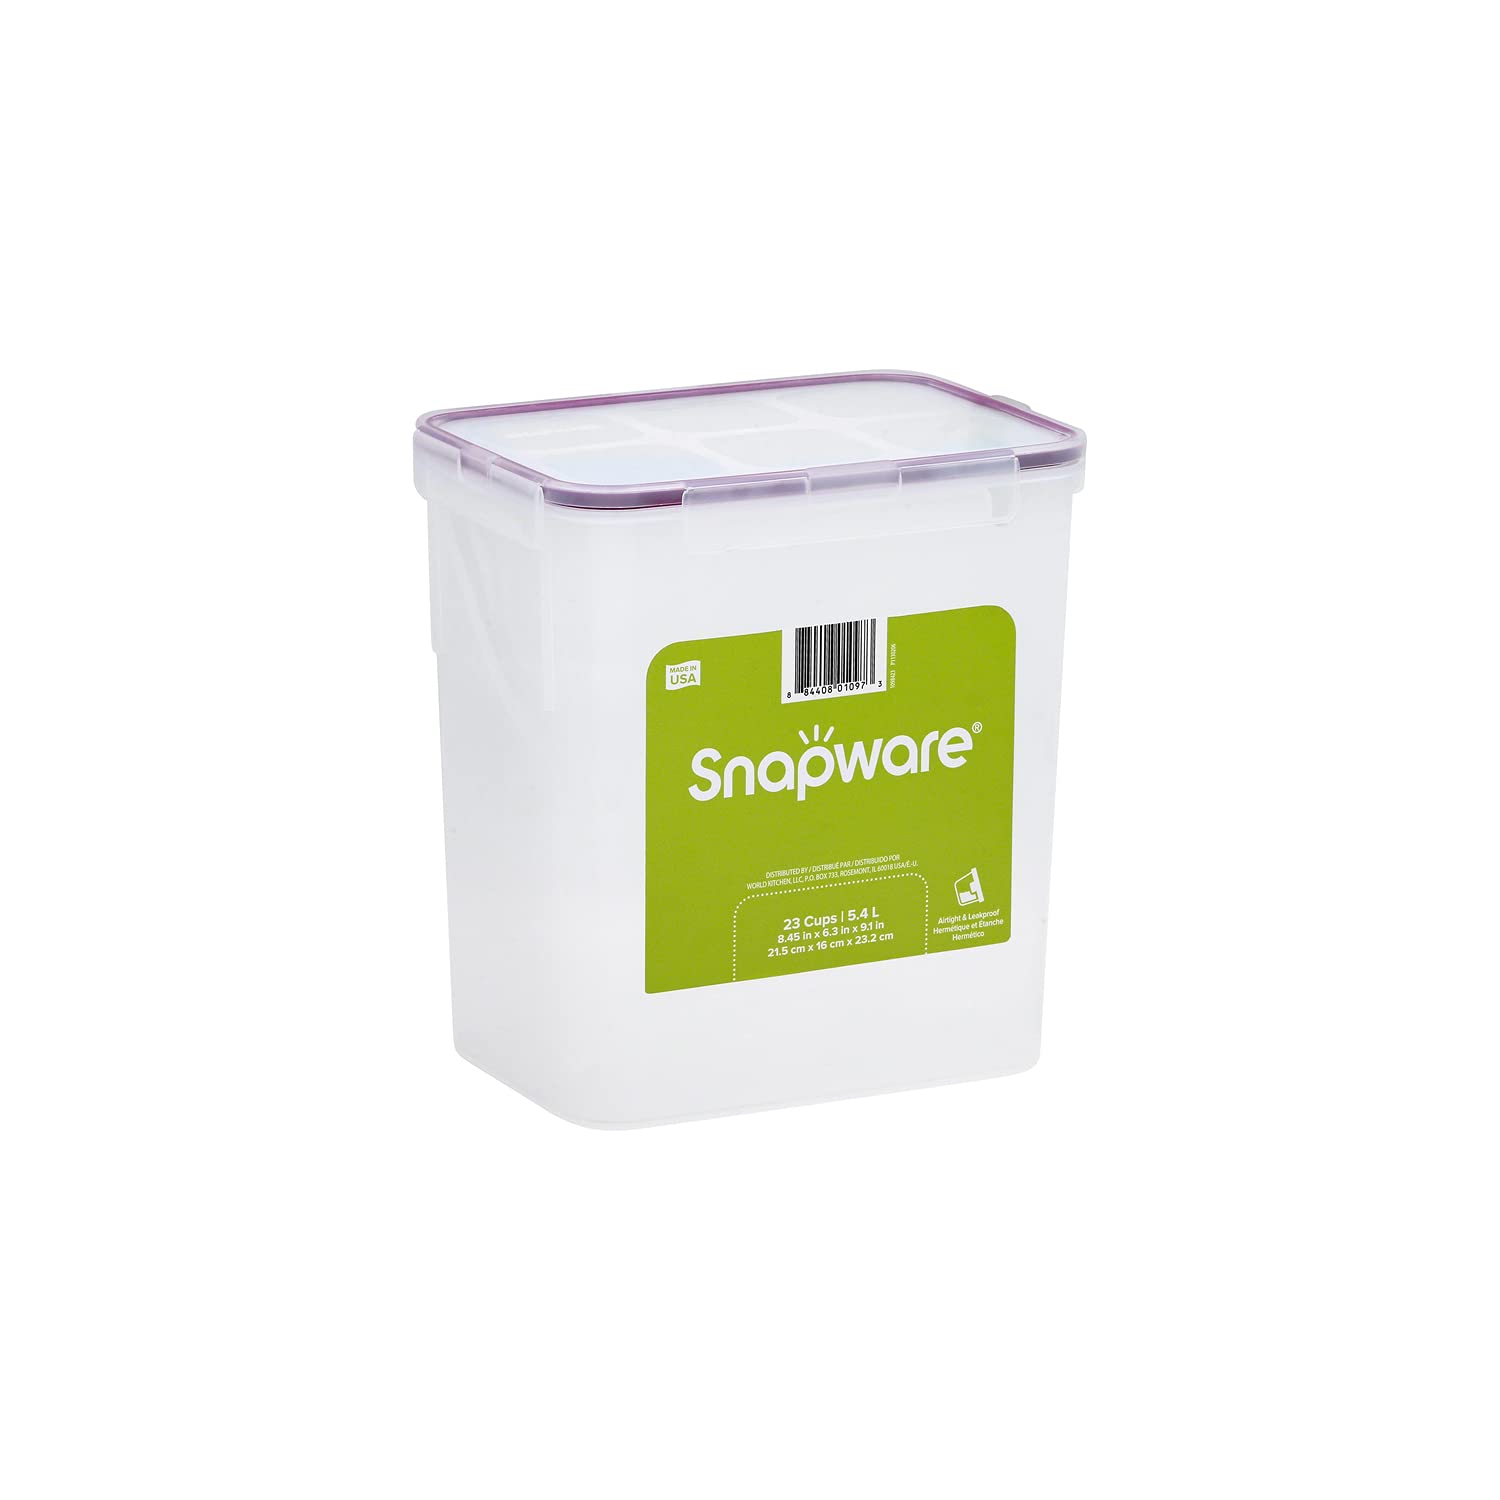 Snapware 23 cup clear Food Storage container 1 pk